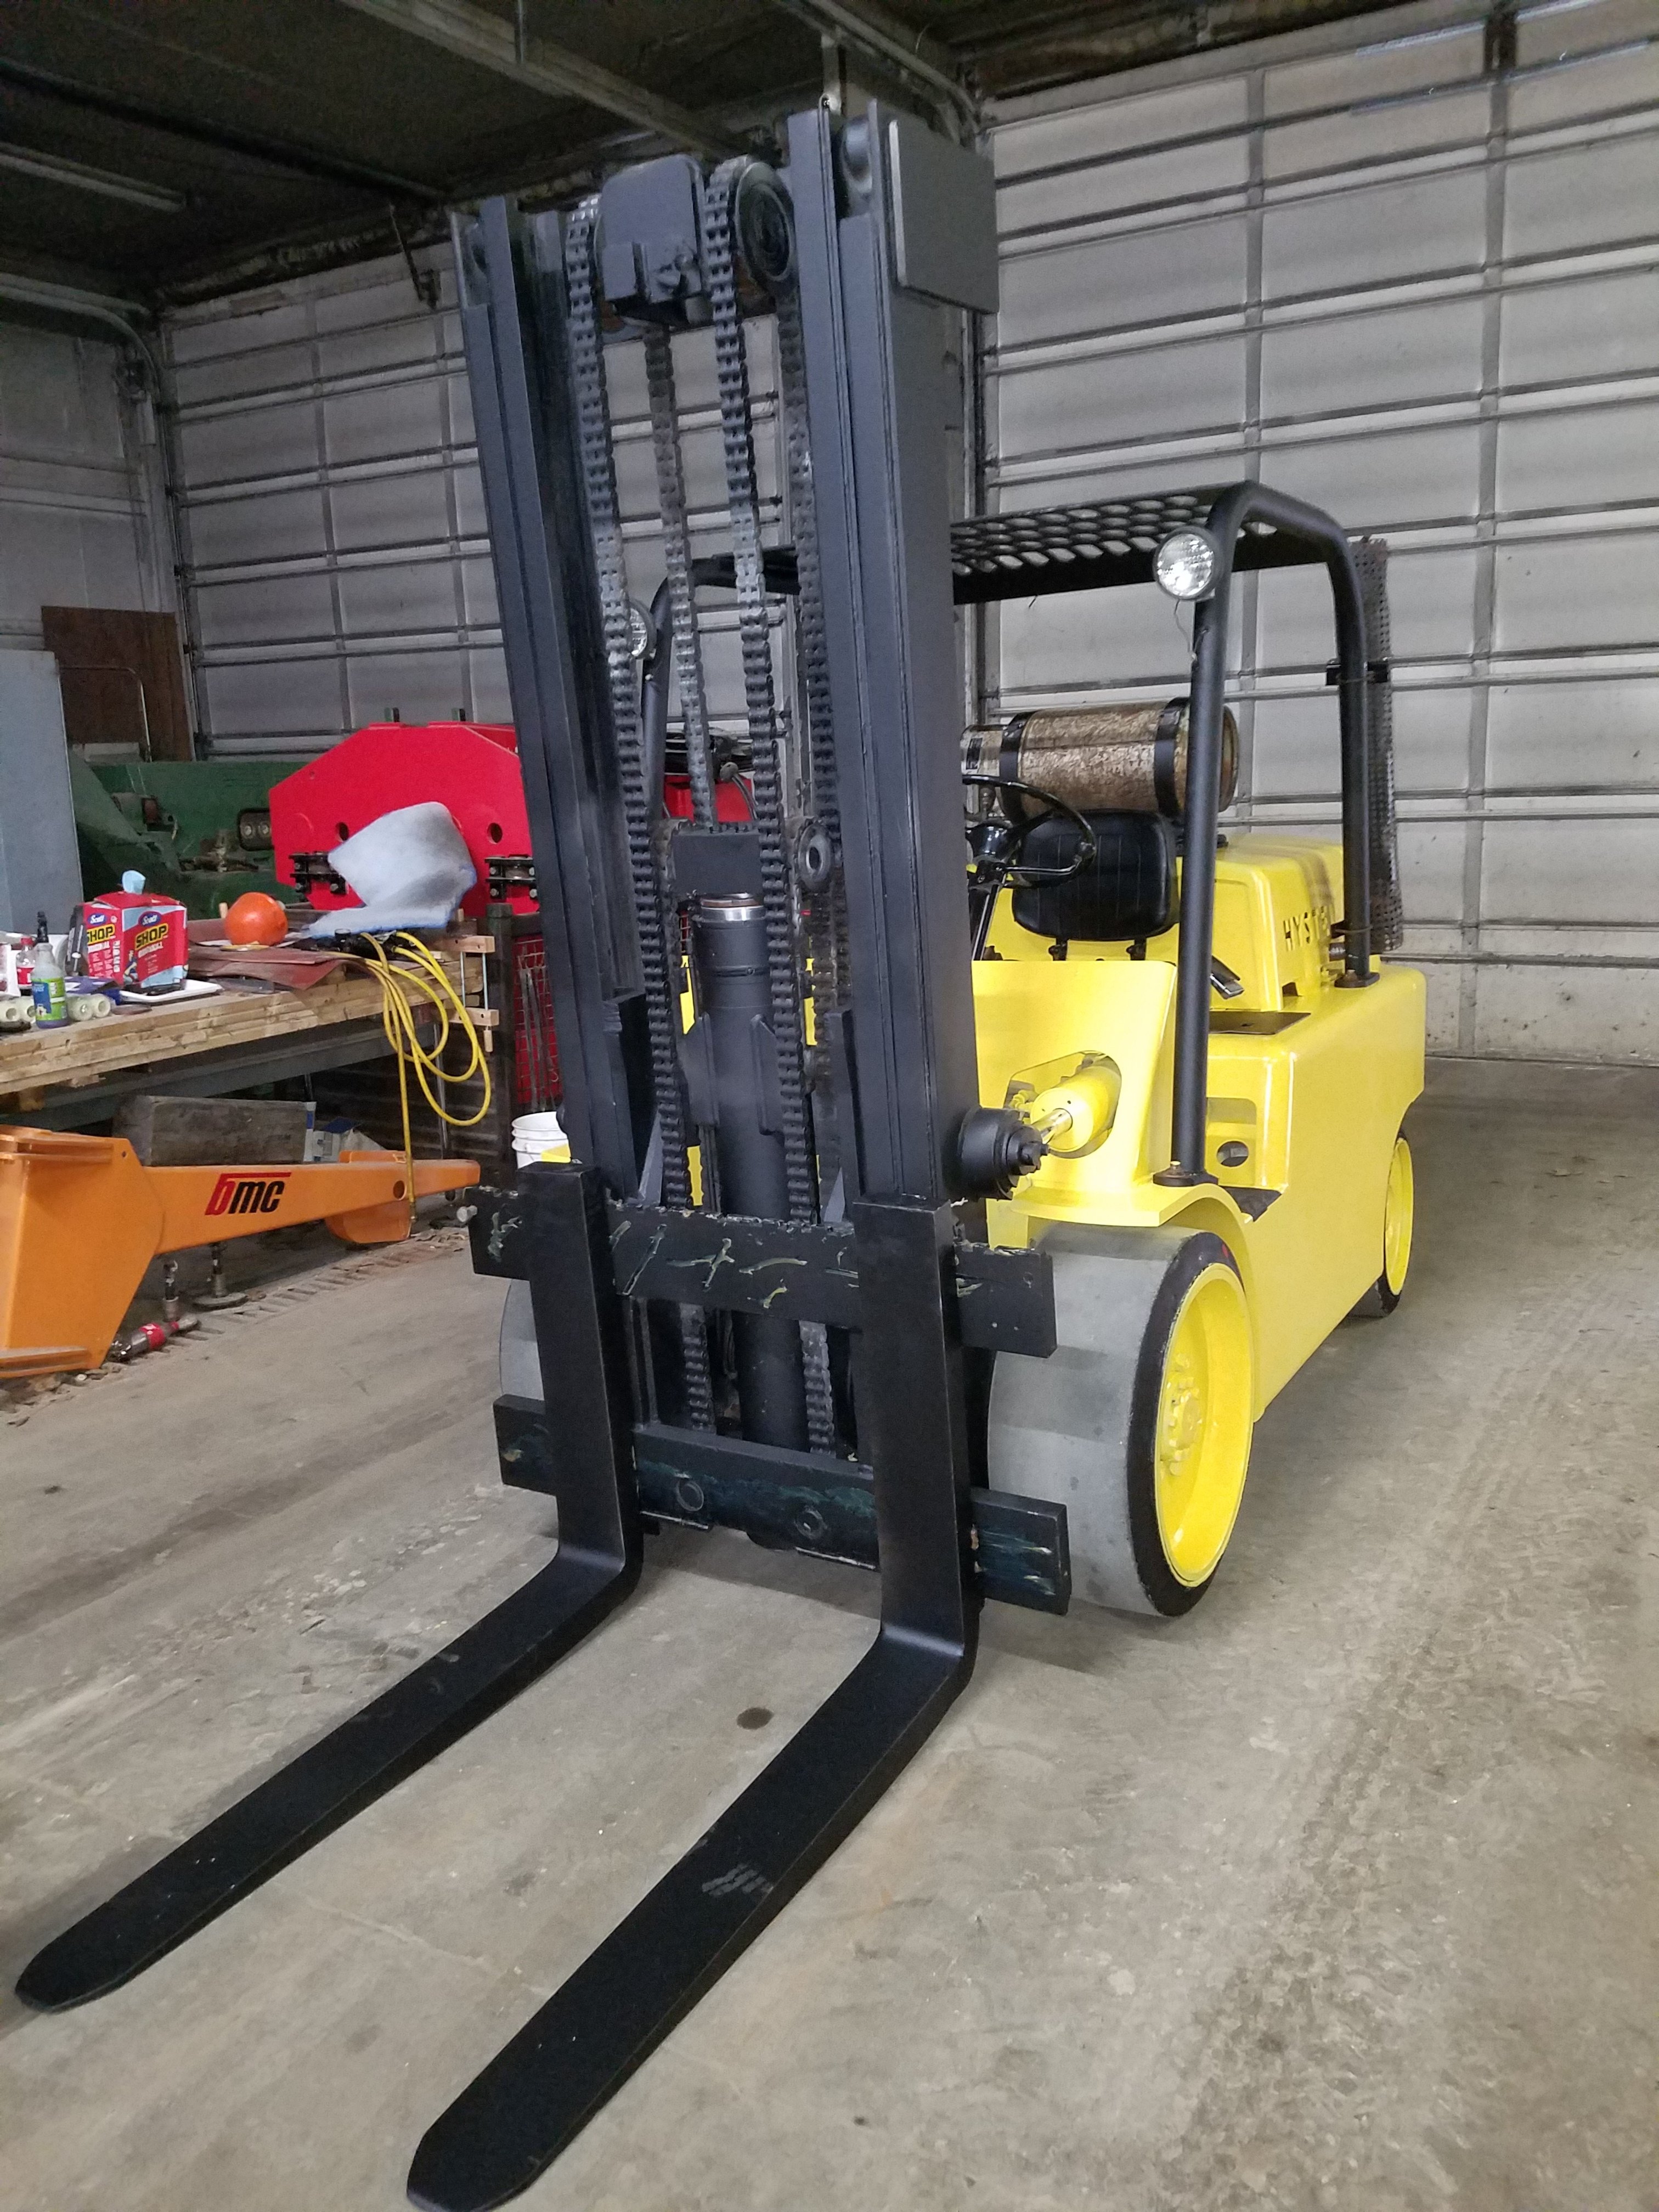 15,000lb. Capacity Hyster S-150 Forklift For Sale 15kCapHysterS150FLFS2